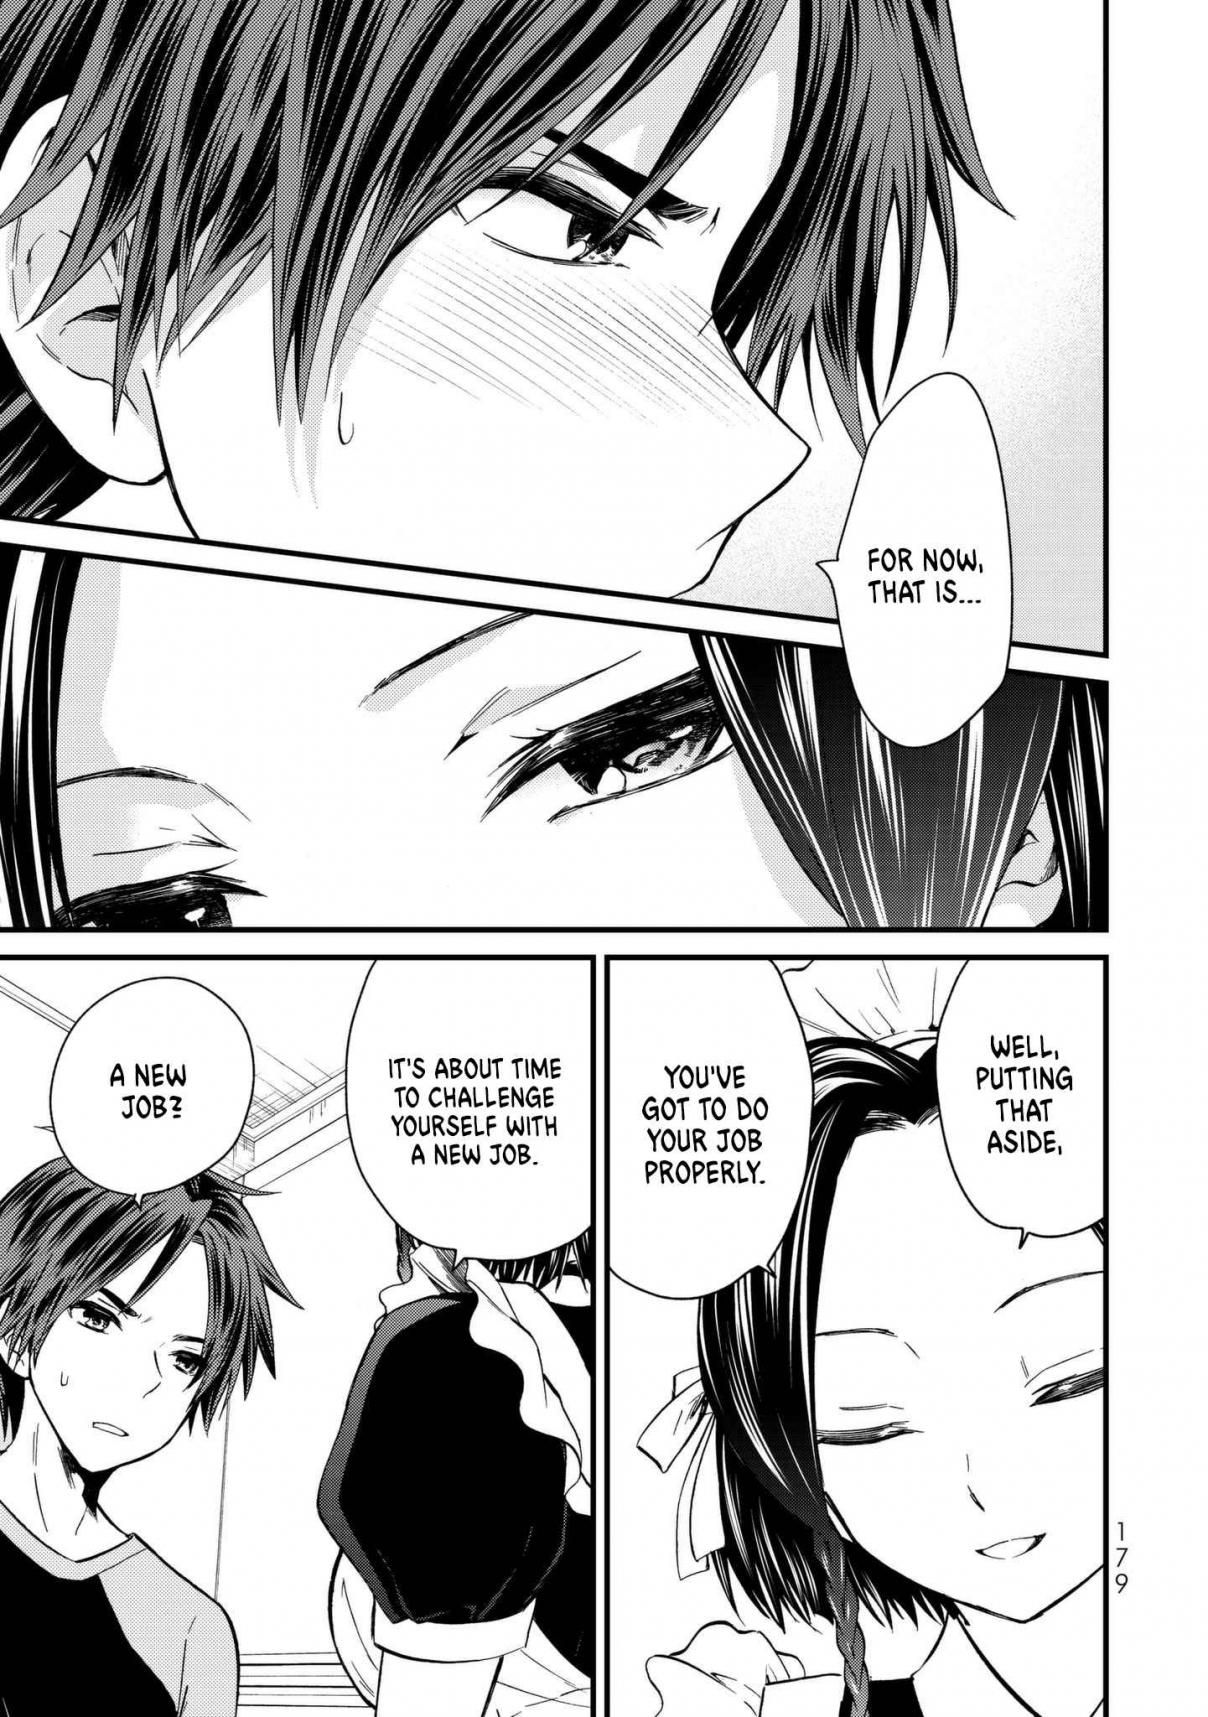 Ojousama no Shimobe Vol. 2 Ch. 19 I want to touch